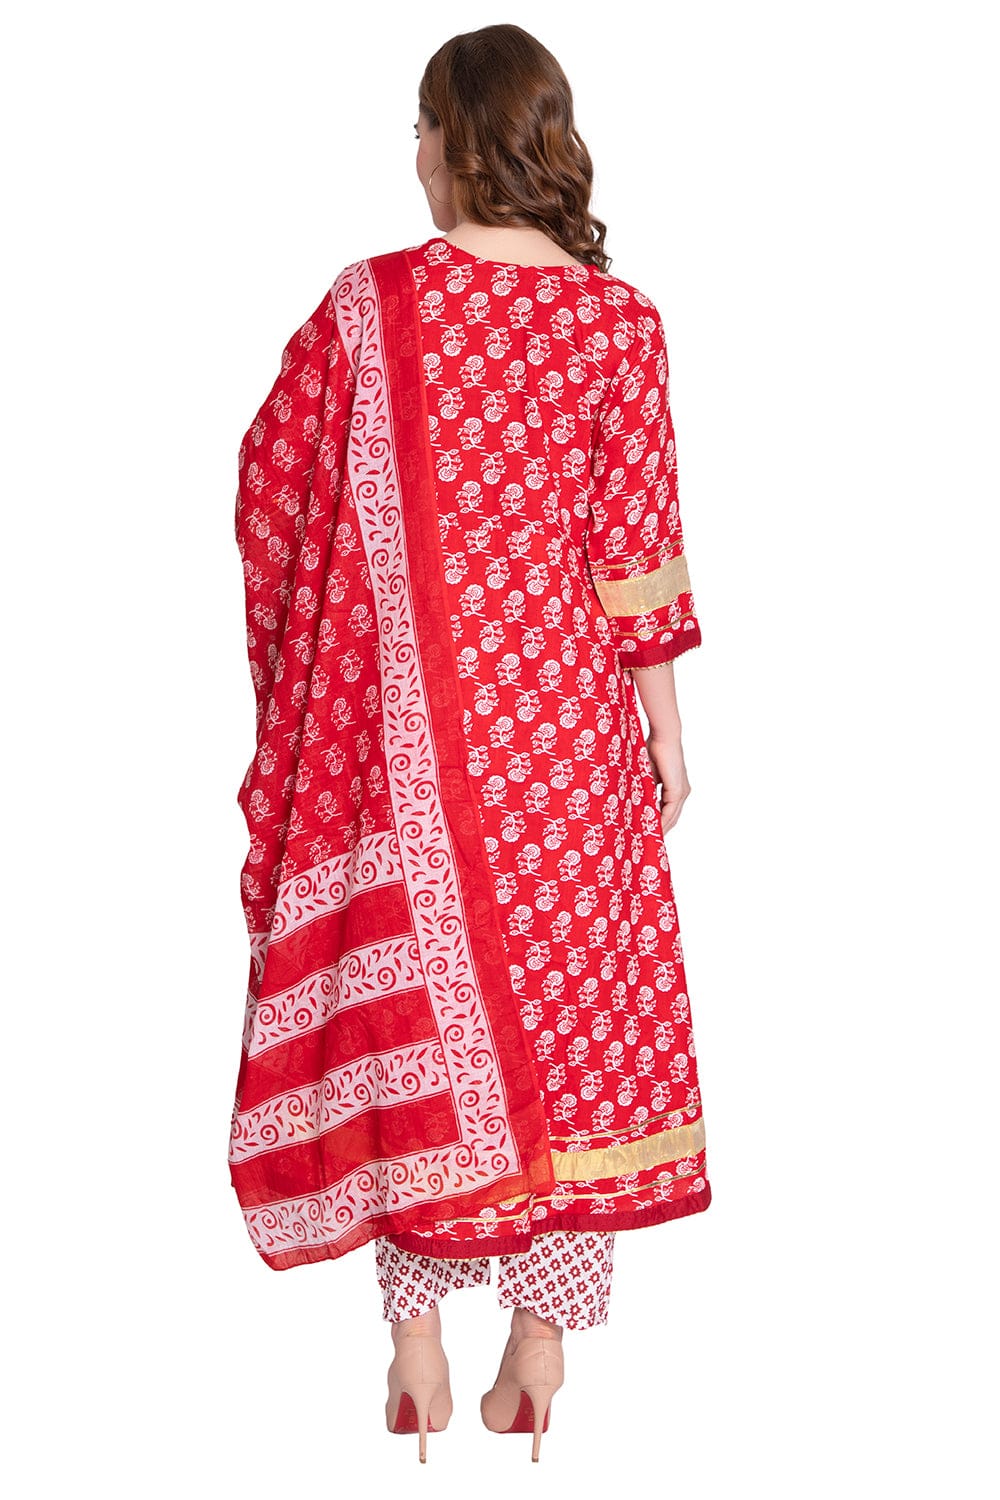 Red Hand Block Printed Anarkali Suit - Craftystyles